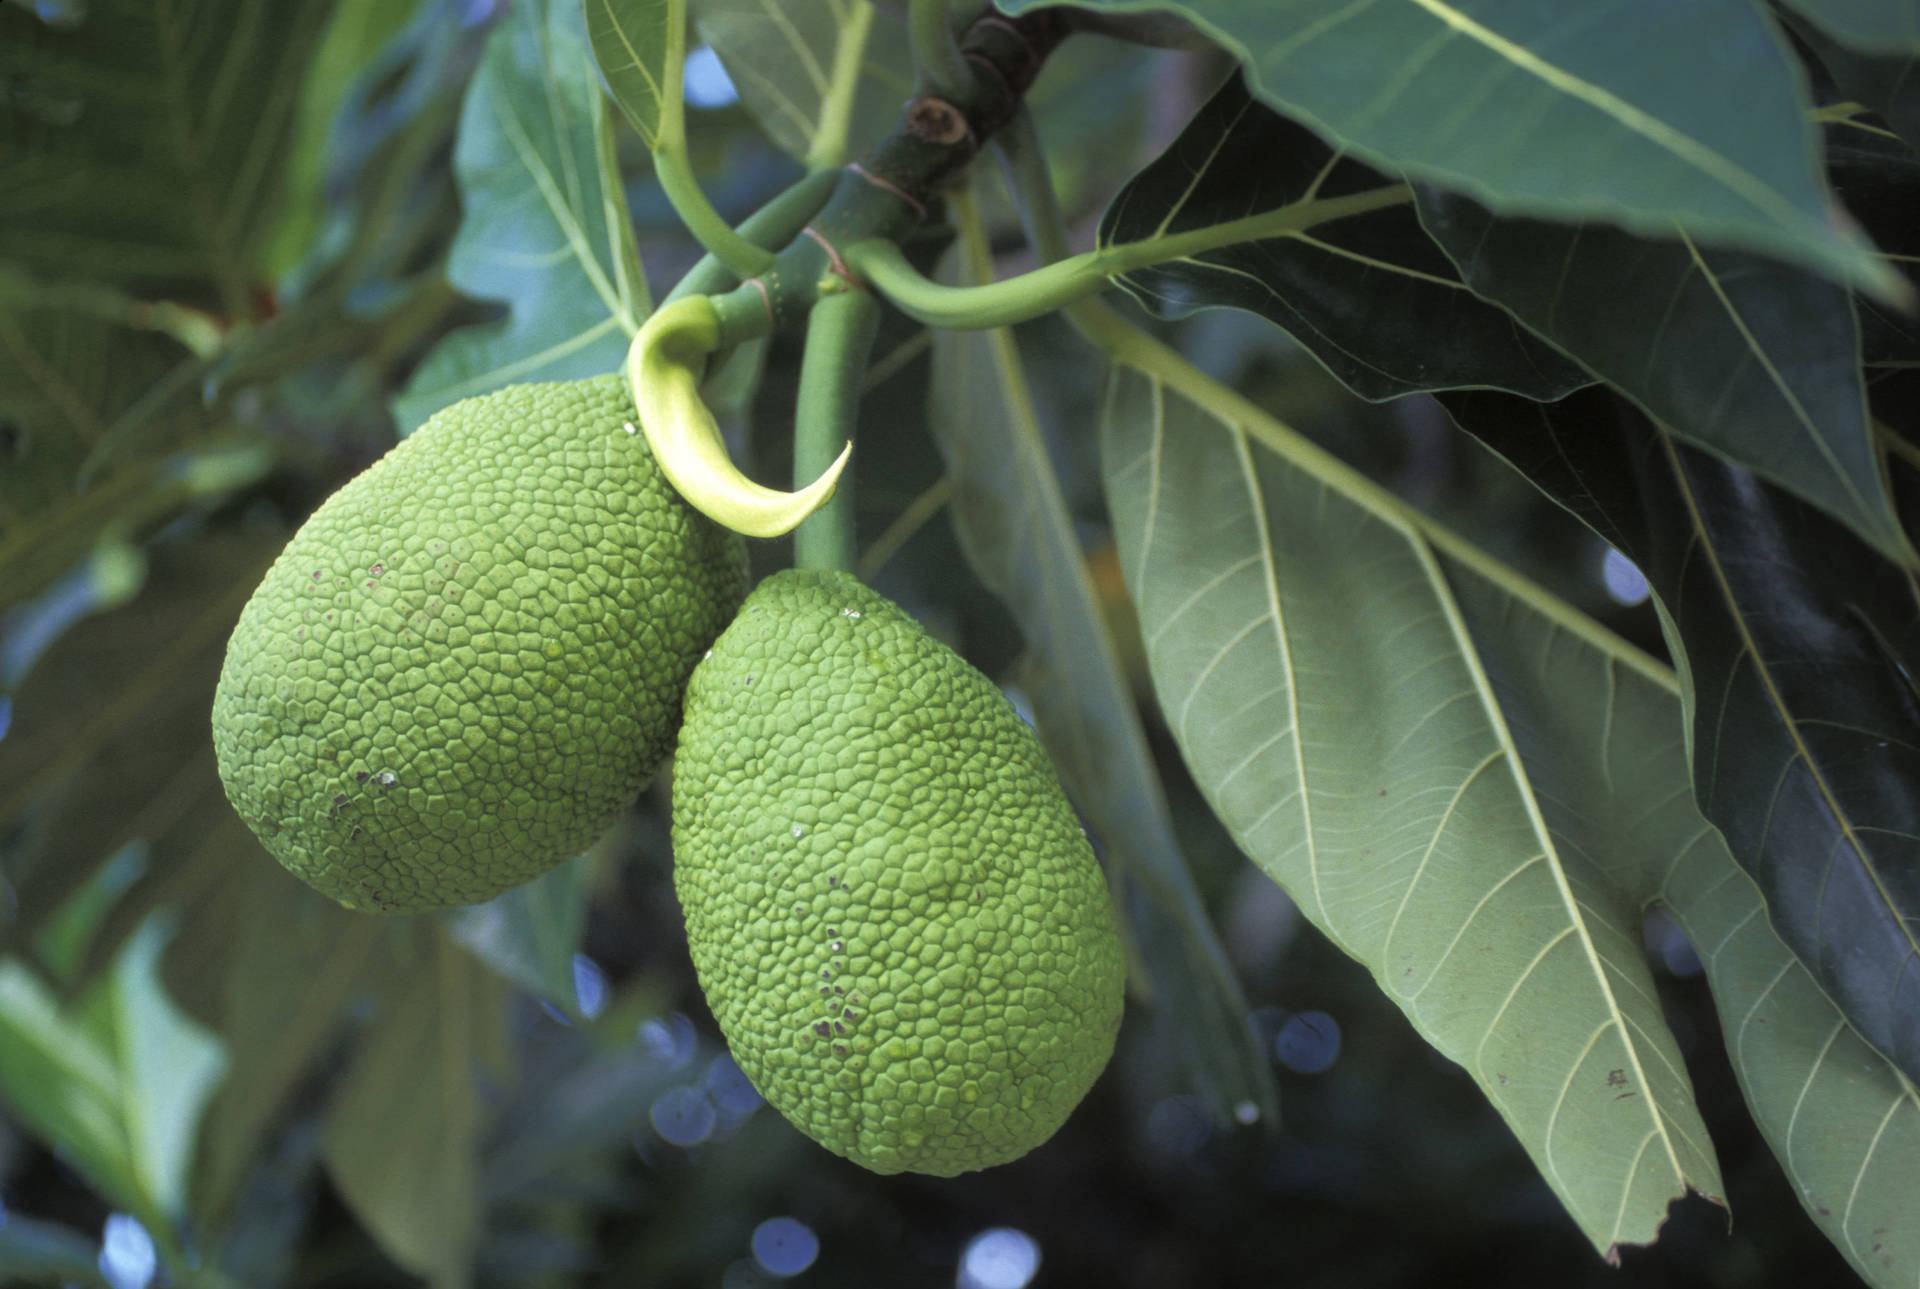 Caption: "Two Oblong Breadfruit on a Natural Background" Wallpaper